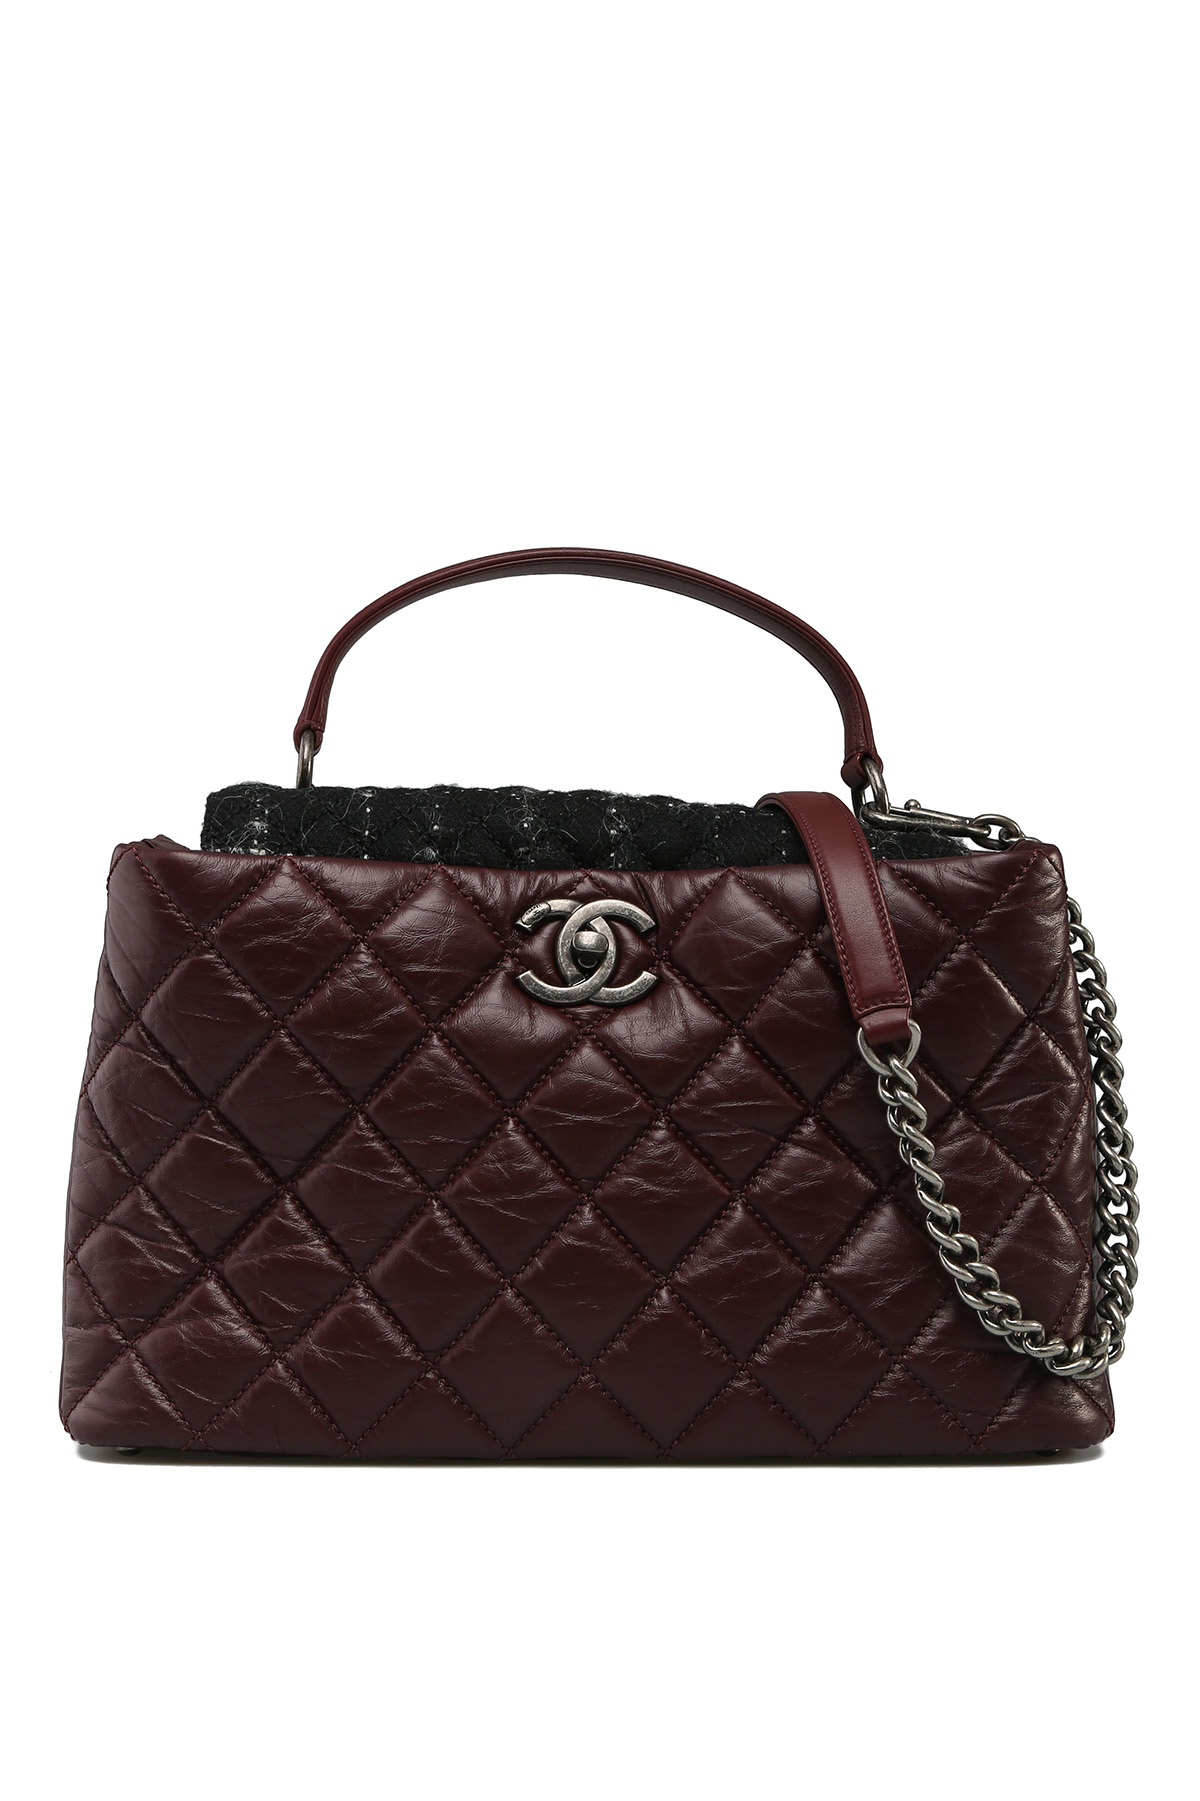 Chanel Large Quilted Portobello Top Handle Bag in Burgundy Aged